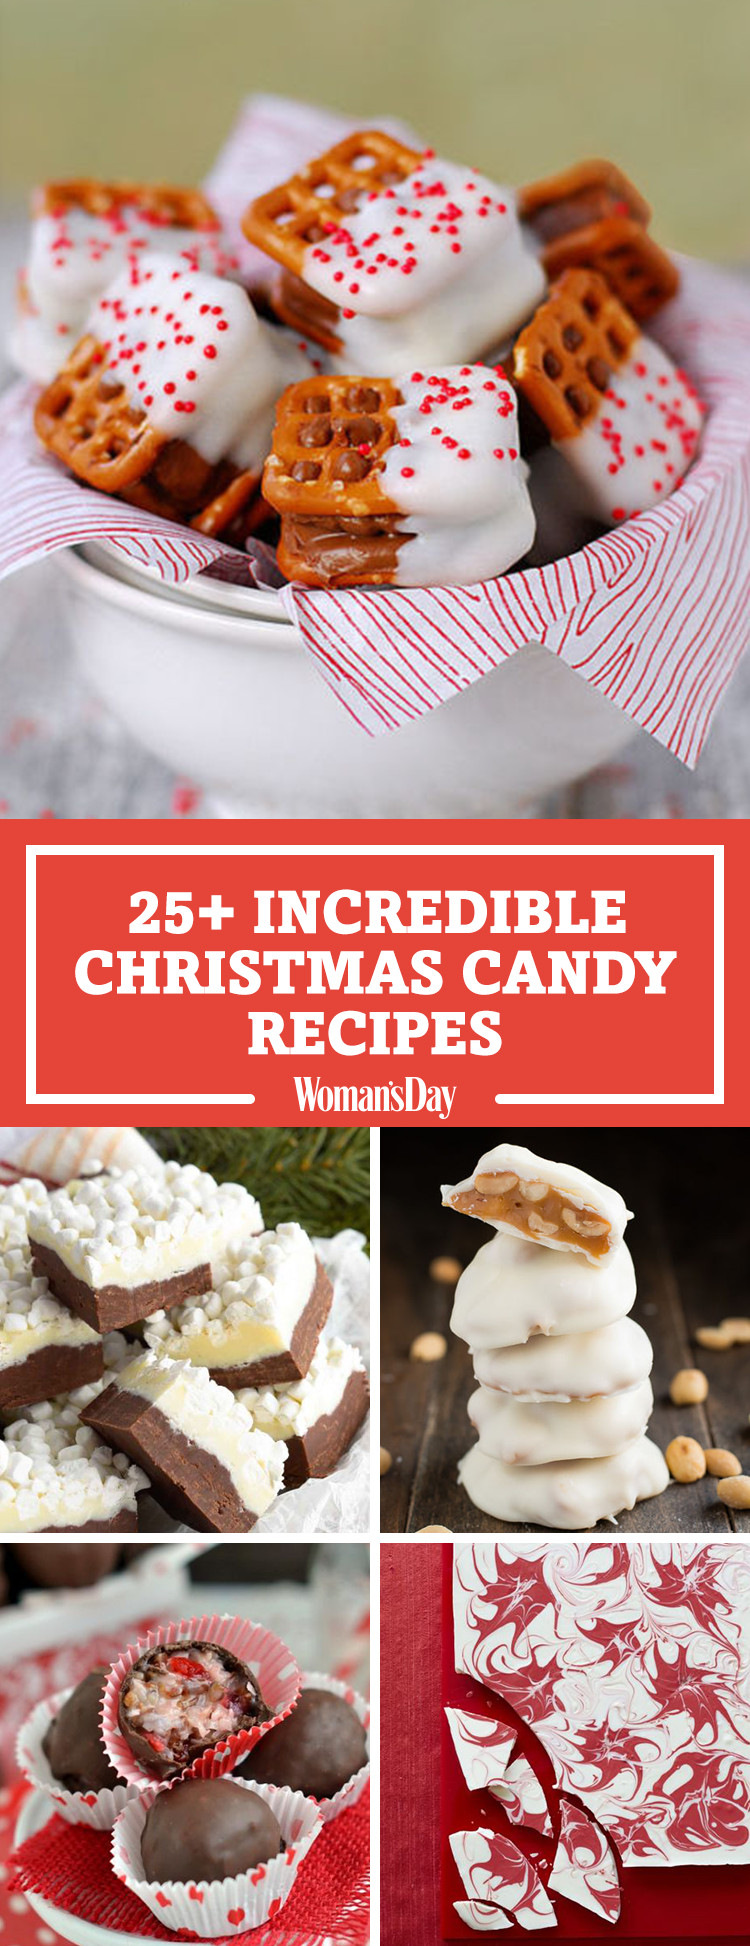 Recipes For Christmas Candy
 28 Homemade Christmas Candy Recipes How To Make Your Own